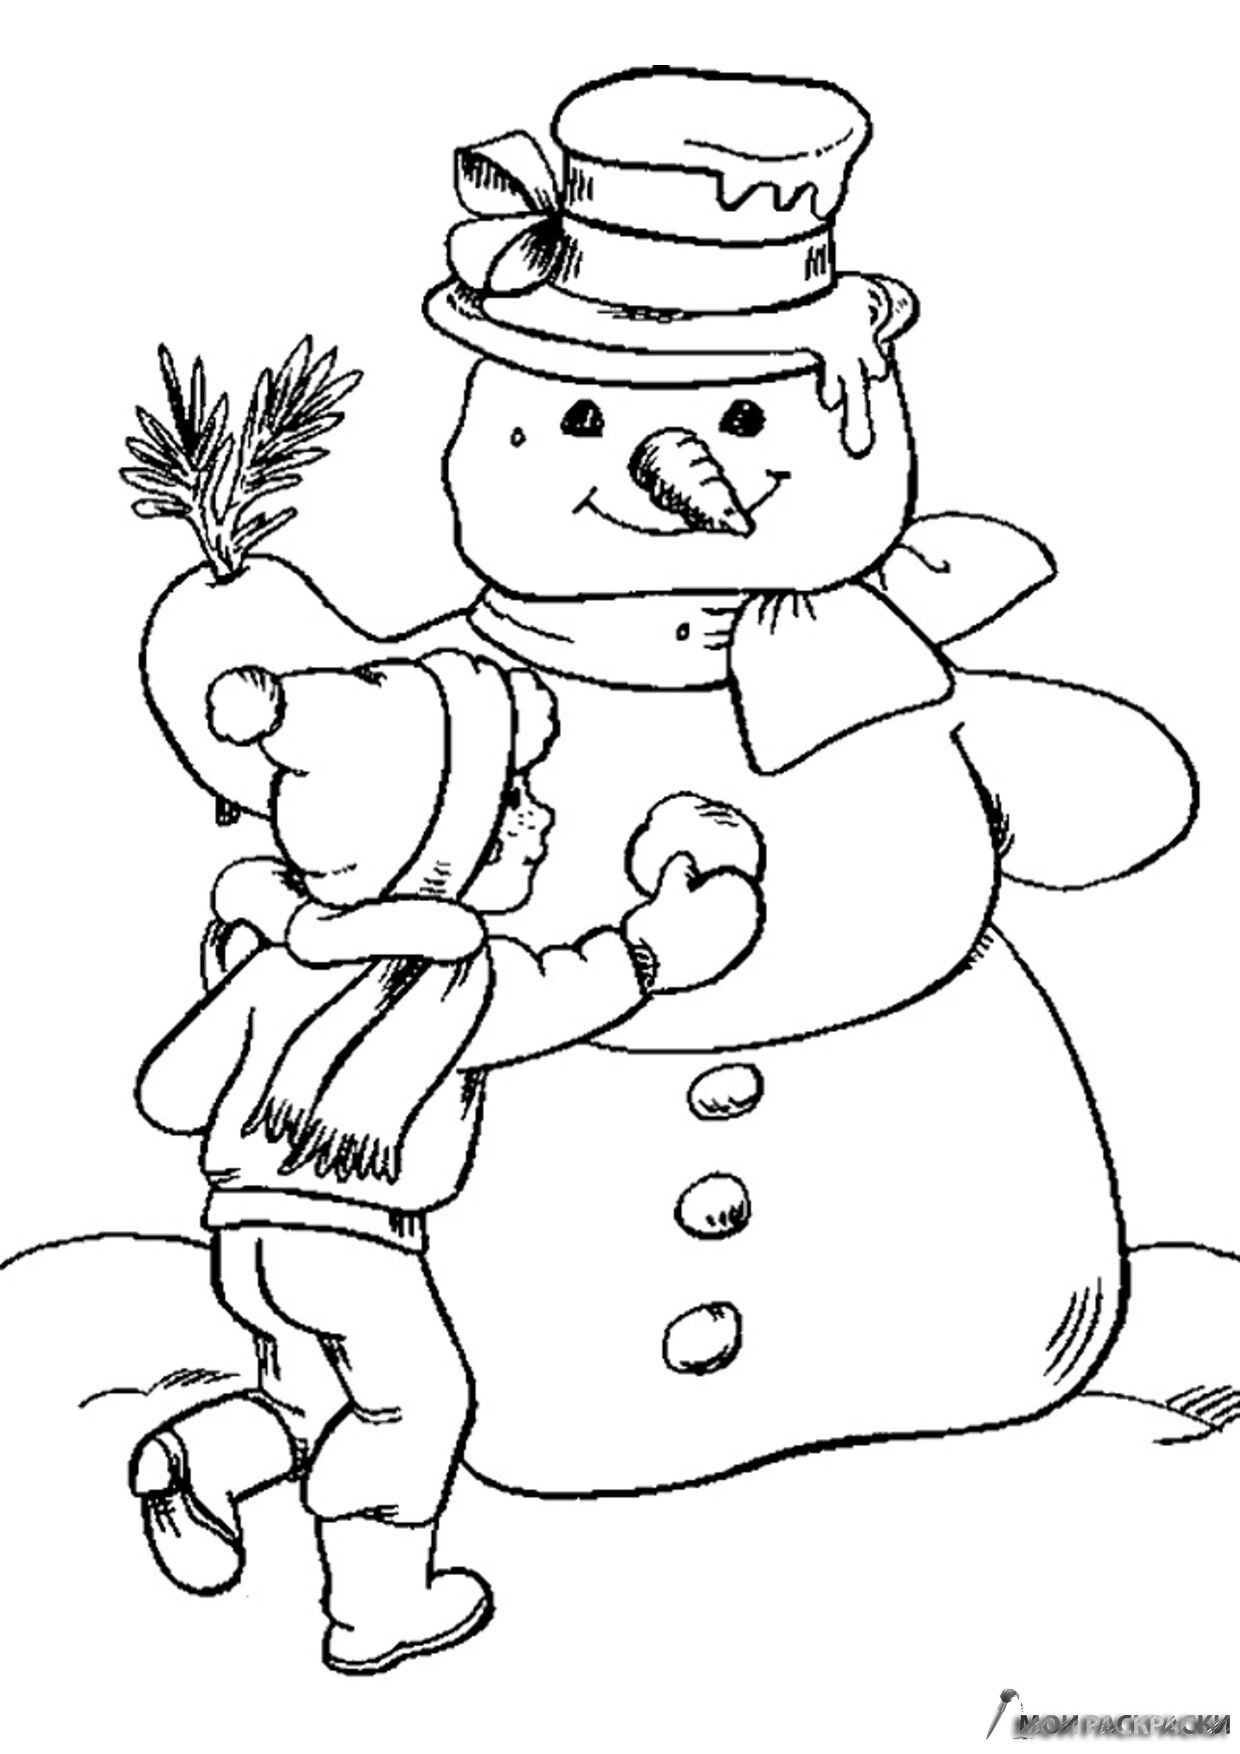 Funny snowman for kids #9